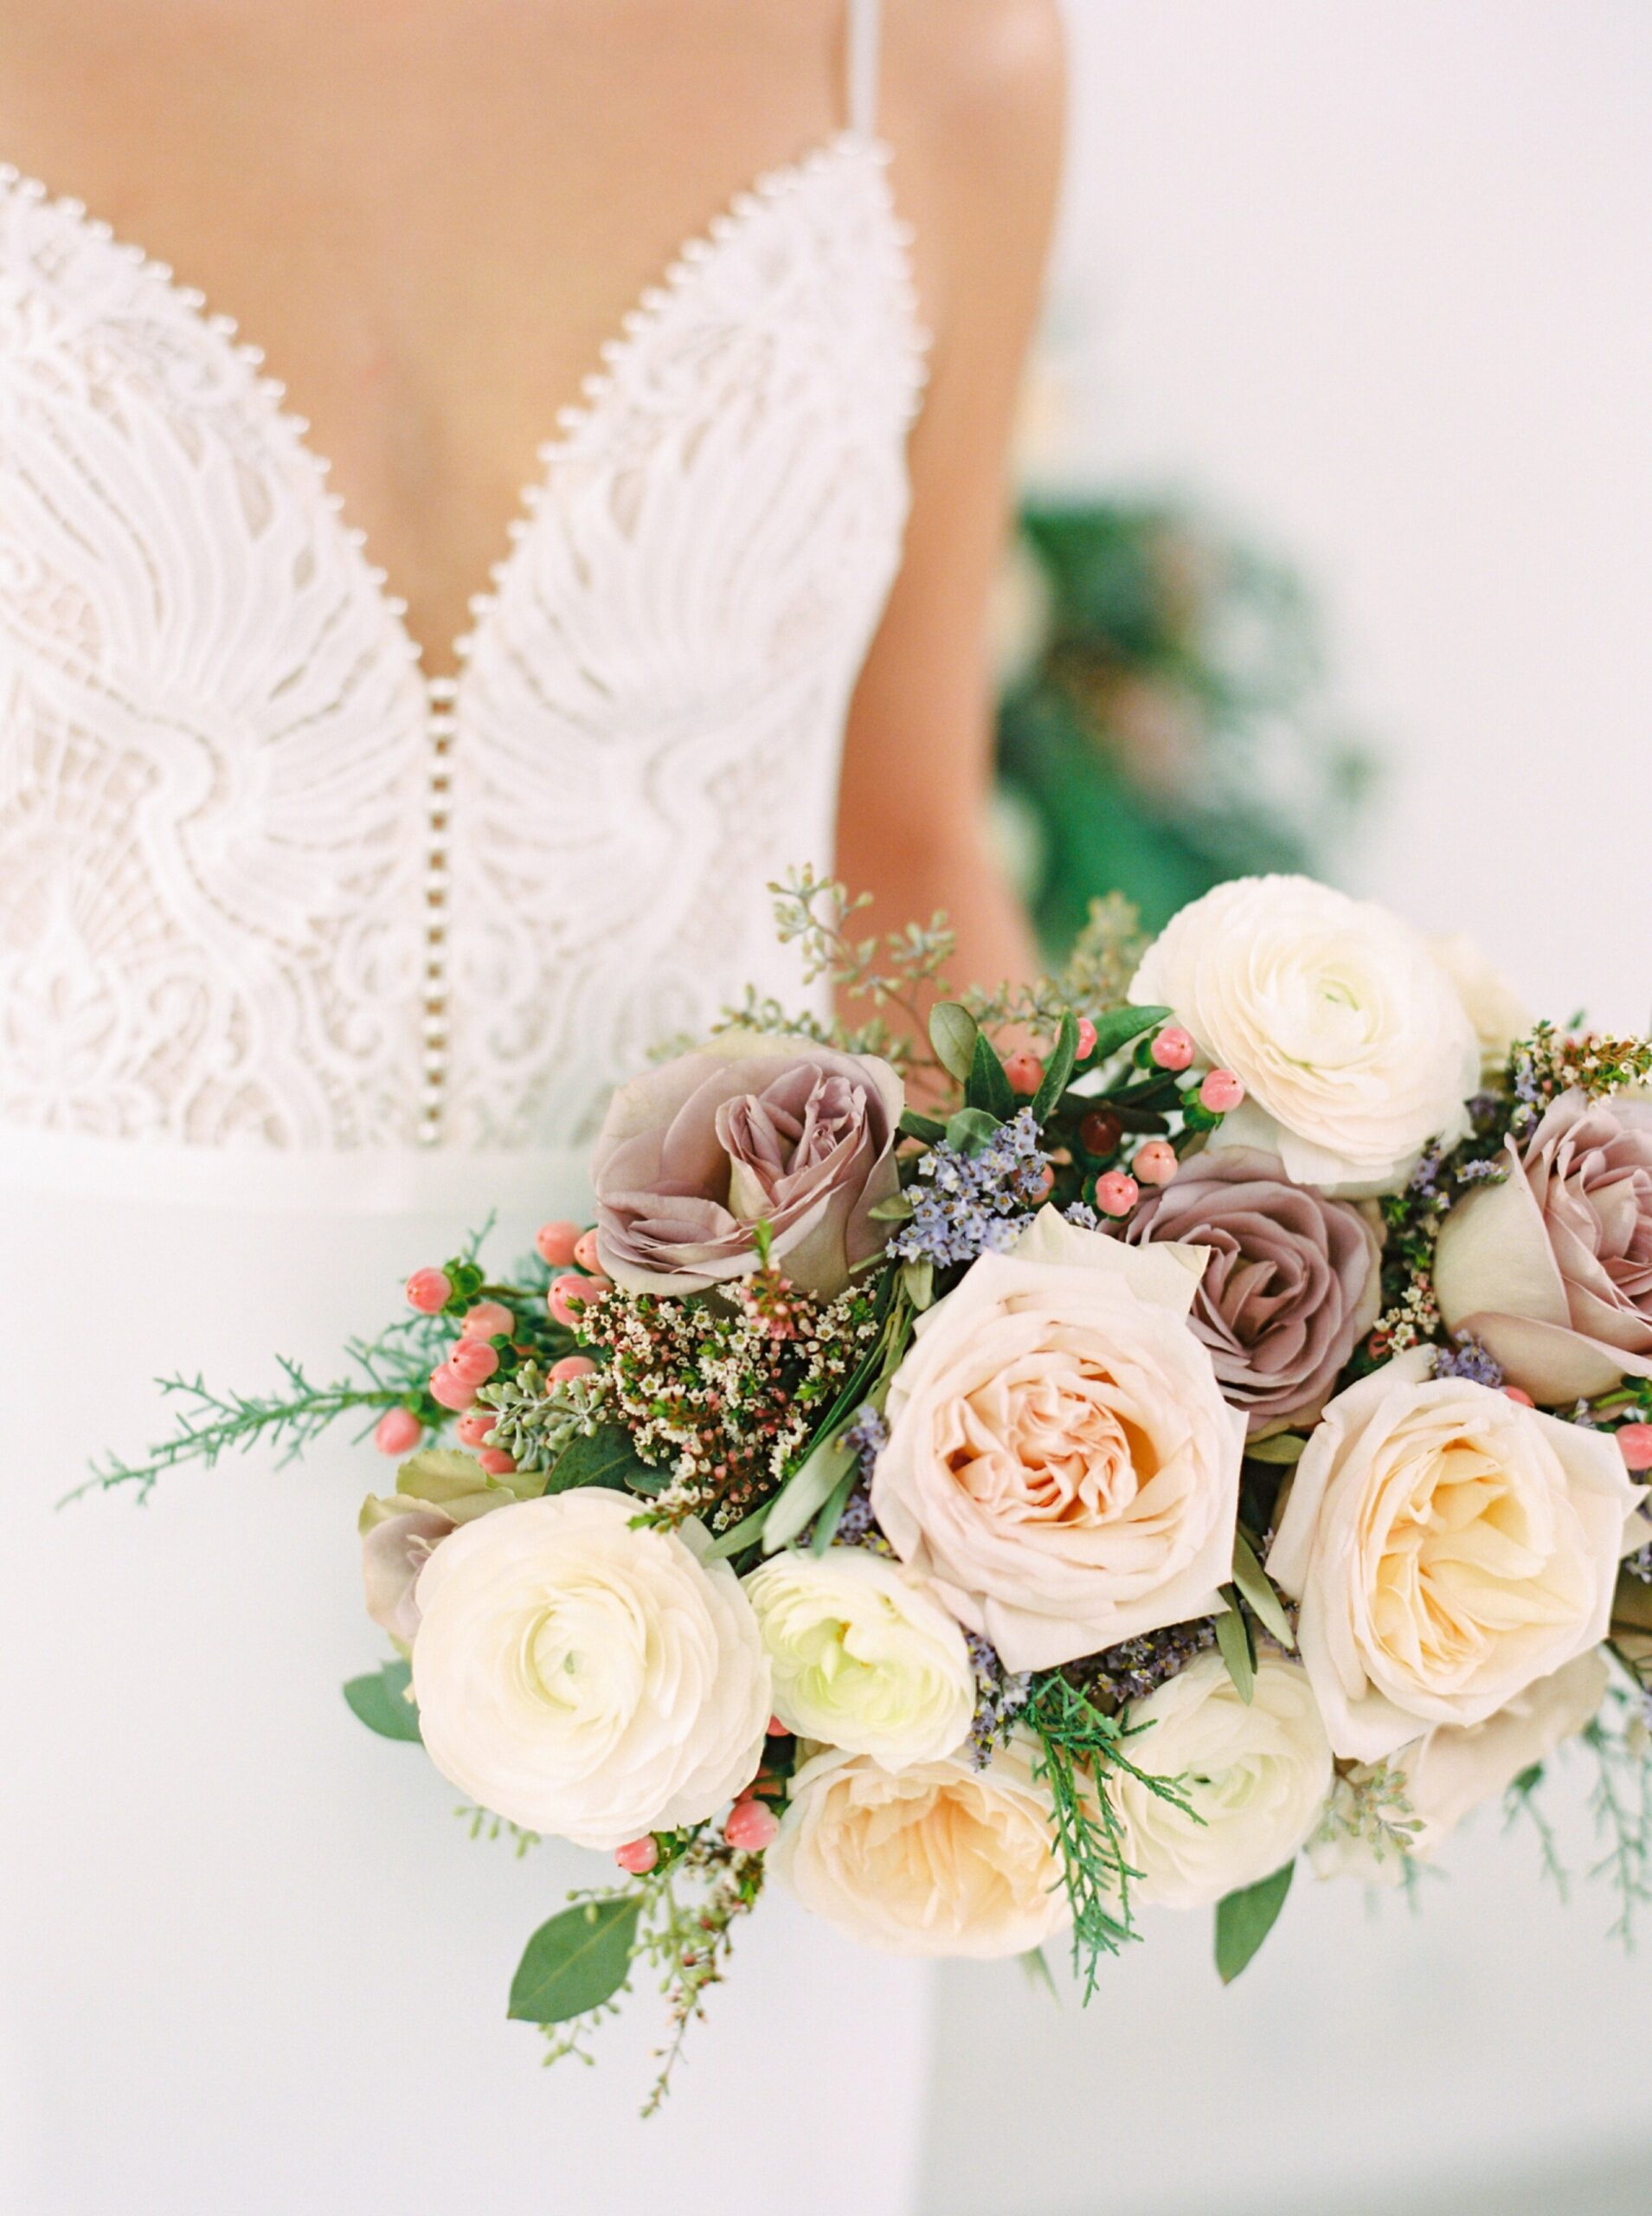  wedding dress inspiration | fine art flower installation with greenery above fireplace | modern bridal bouquet with dusty pinks and roses 